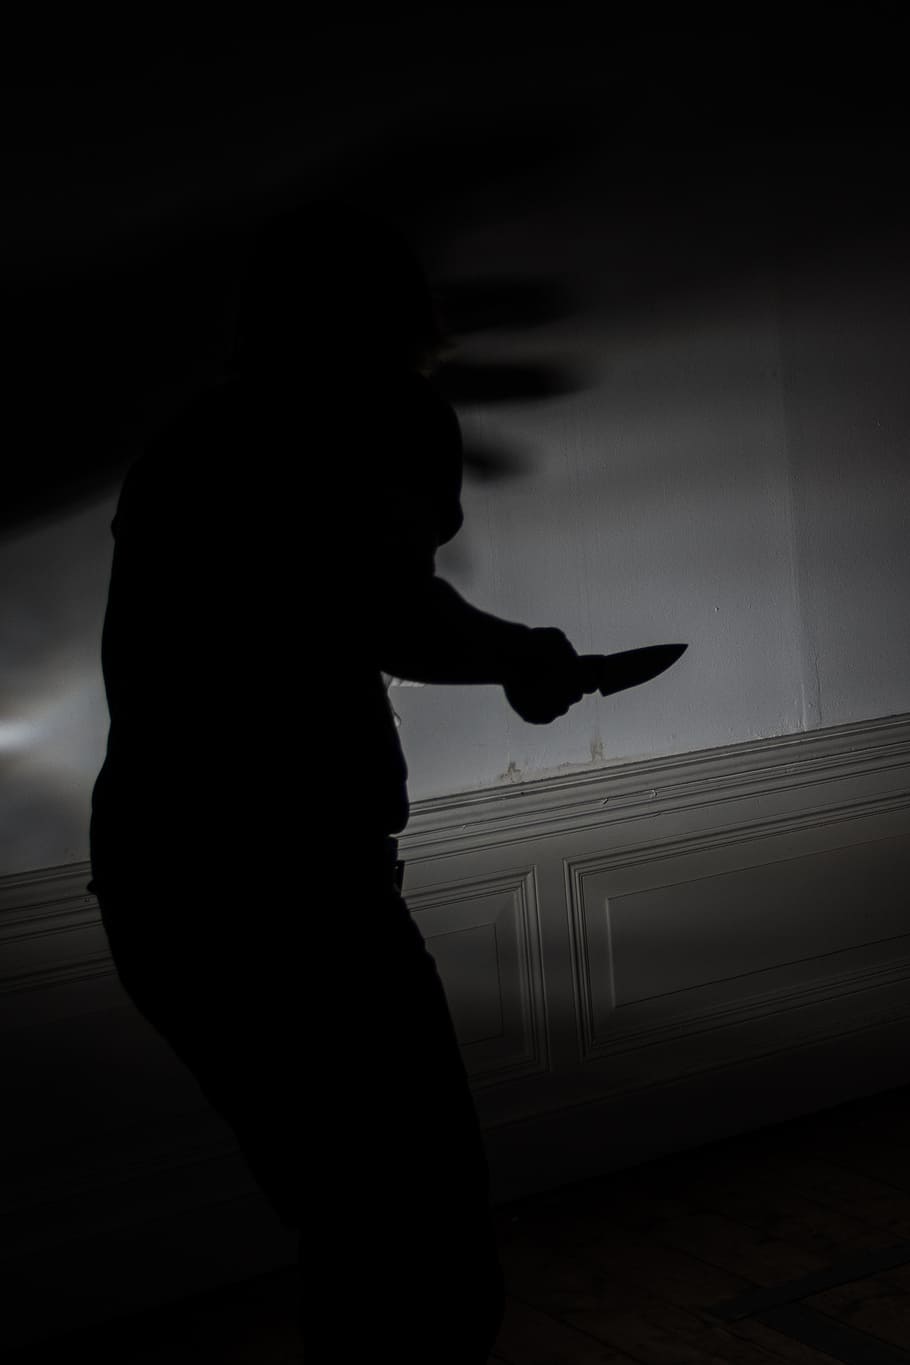 photograph of silhouette person holding a knife, murder, fear